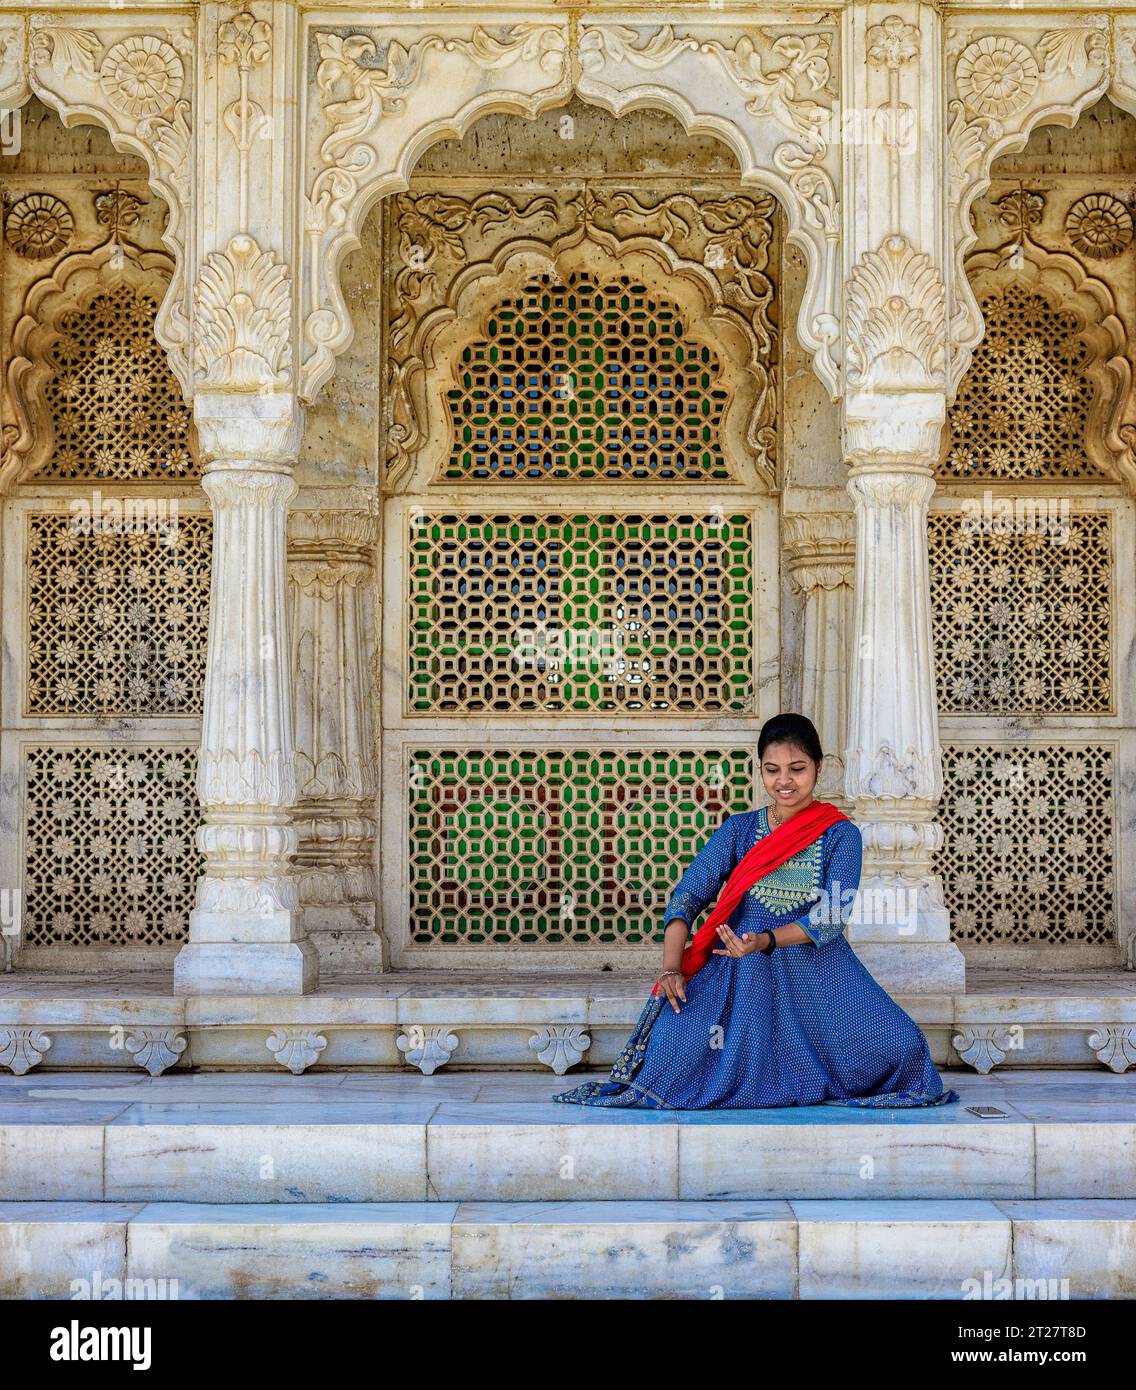 Local Instagrammer in traditional dress, dances in front of the carved-marble lattice screens of the Jaswant Thada in Jodhpur Stock Photo